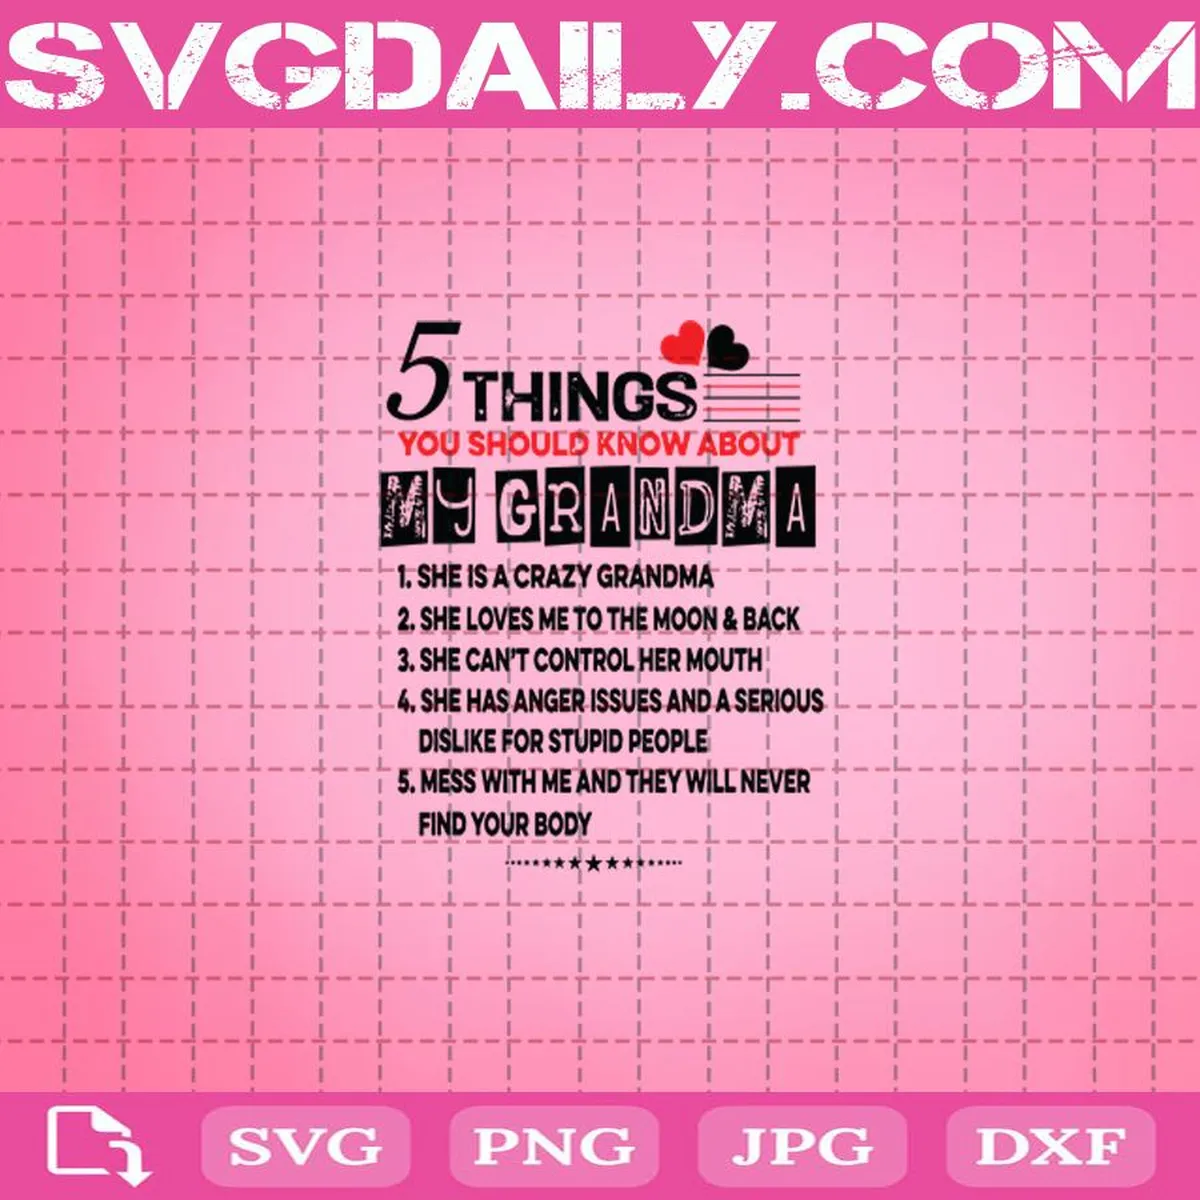 5 Things You Should Know About My Grandma Svg, 5 Things Svg, Grandma Svg, She Is A Crazy Girl Svg, Grandma Gift